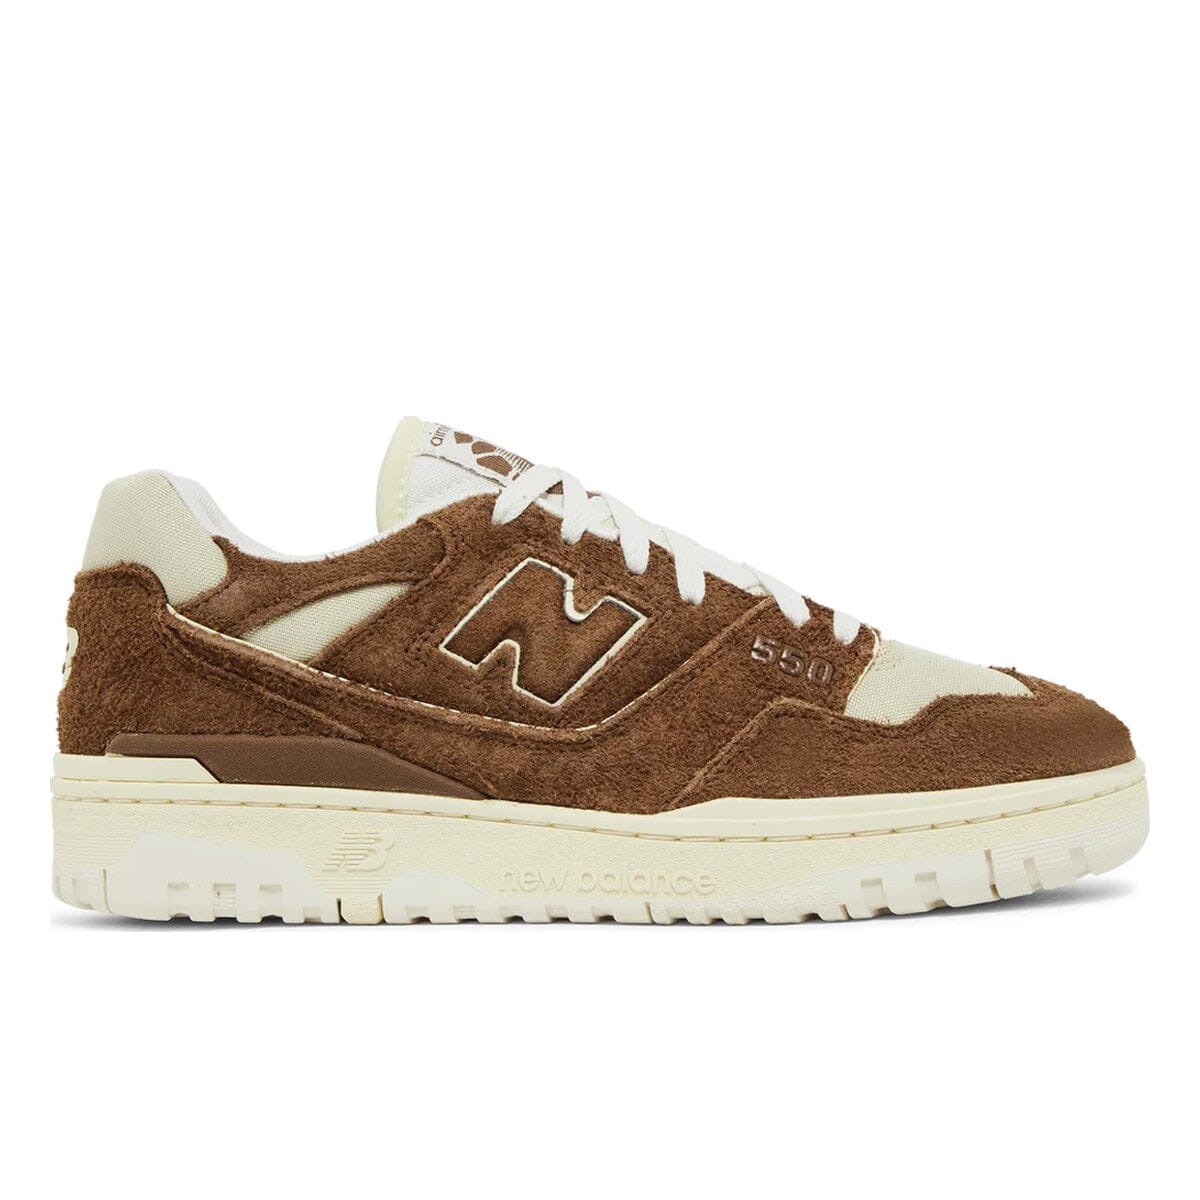 New Balance 550 Aime Leon Dore Brown Suede New Balance 550 Blizz Sneakers 